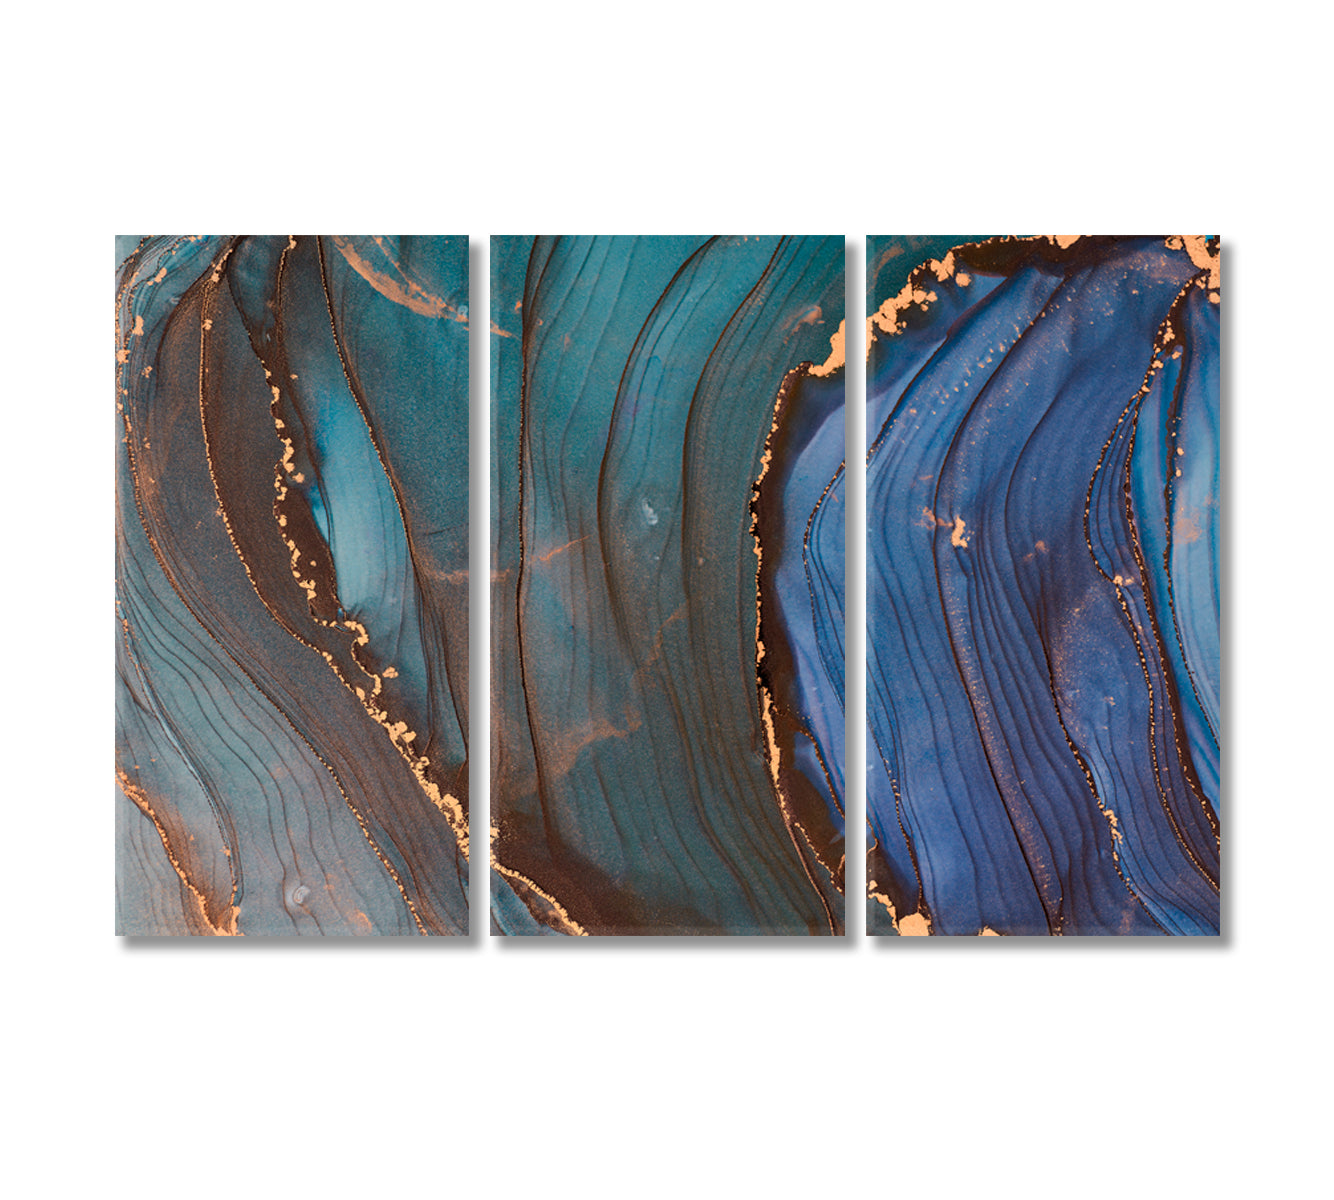 Natural Luxury Abstract Fluid Marble Canvas Print-Canvas Print-CetArt-3 Panels-36x24 inches-CetArt